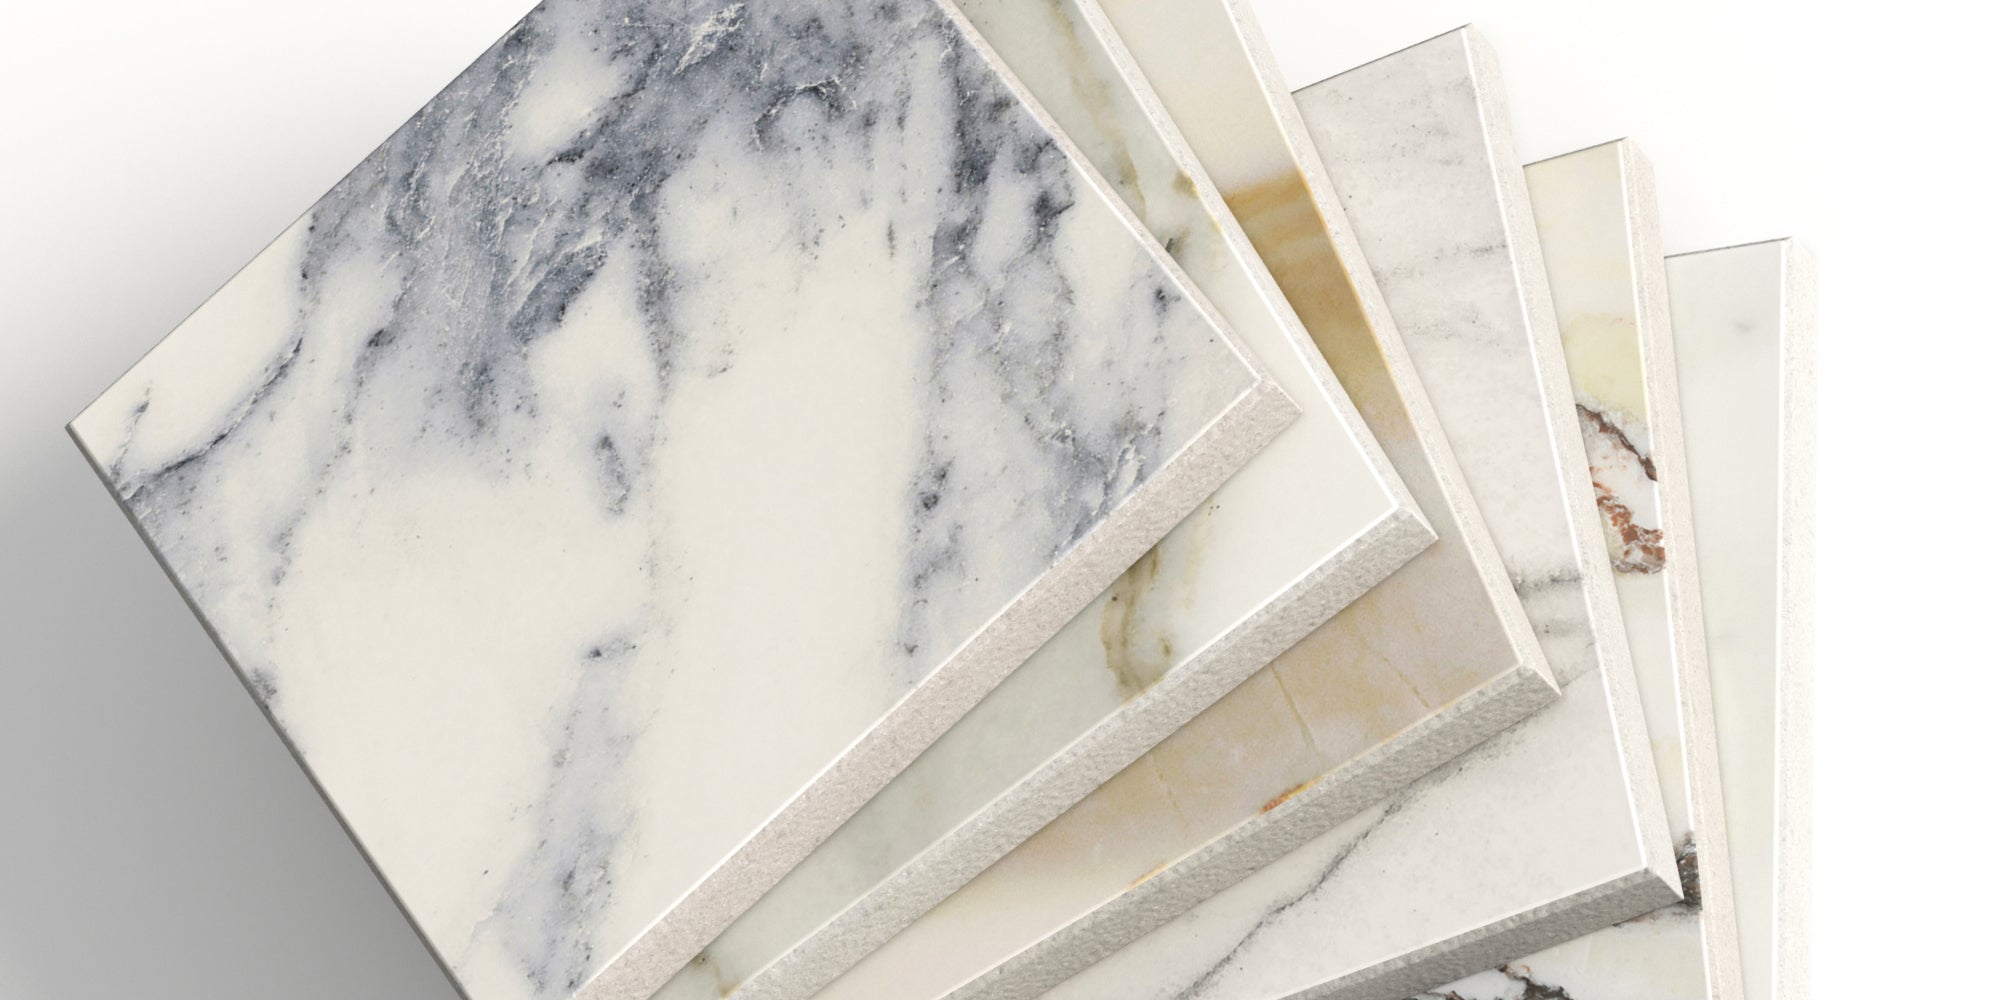 Showcase of complimentary 4x4 Aniston collection samples in six distinct colors, demonstrating the collection's marble-look porcelain versatility.